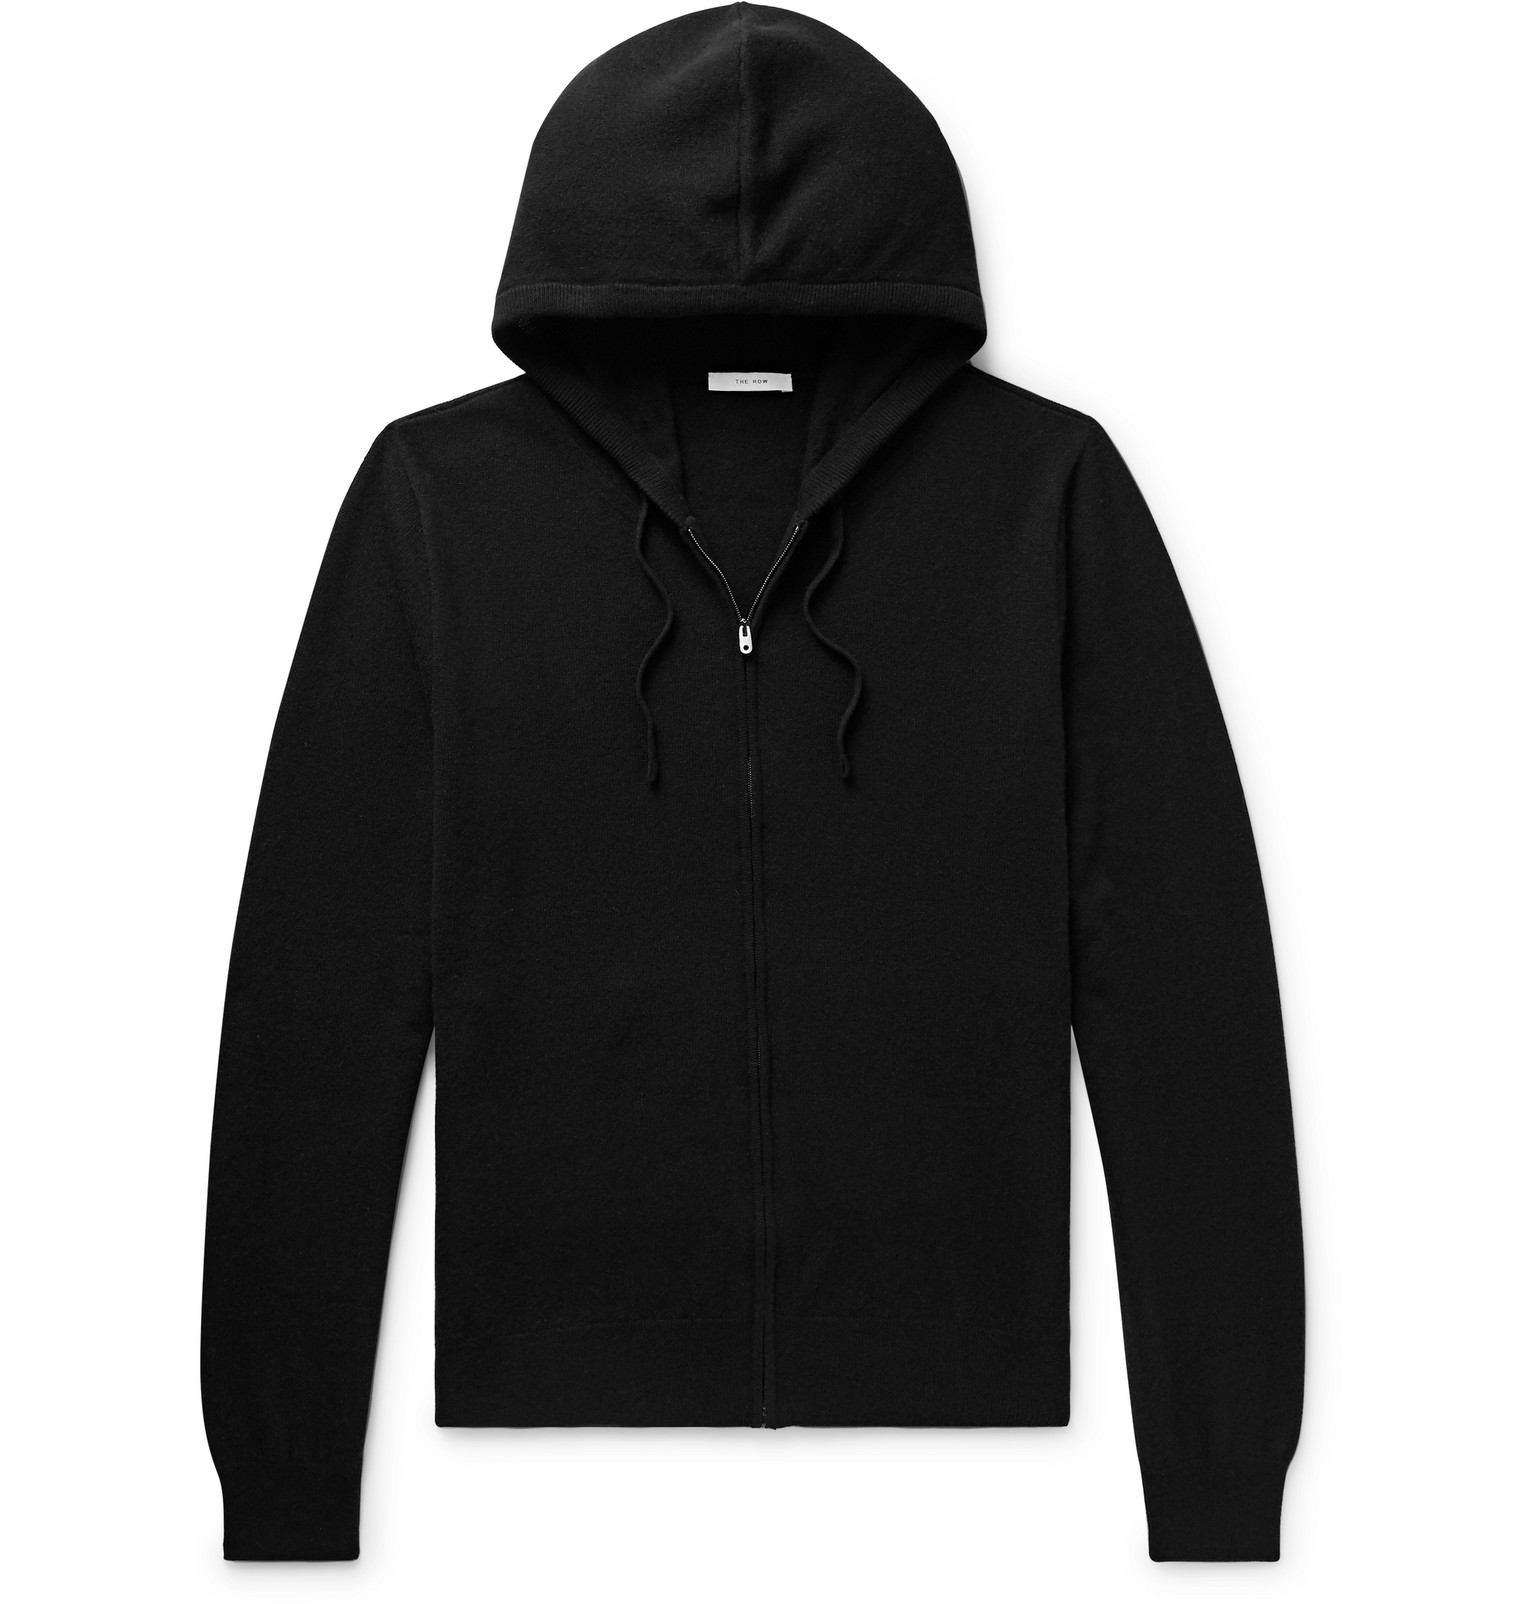 The Row - Harry Cashmere Zip-Up Hoodie - Men - Black | The Fashionisto